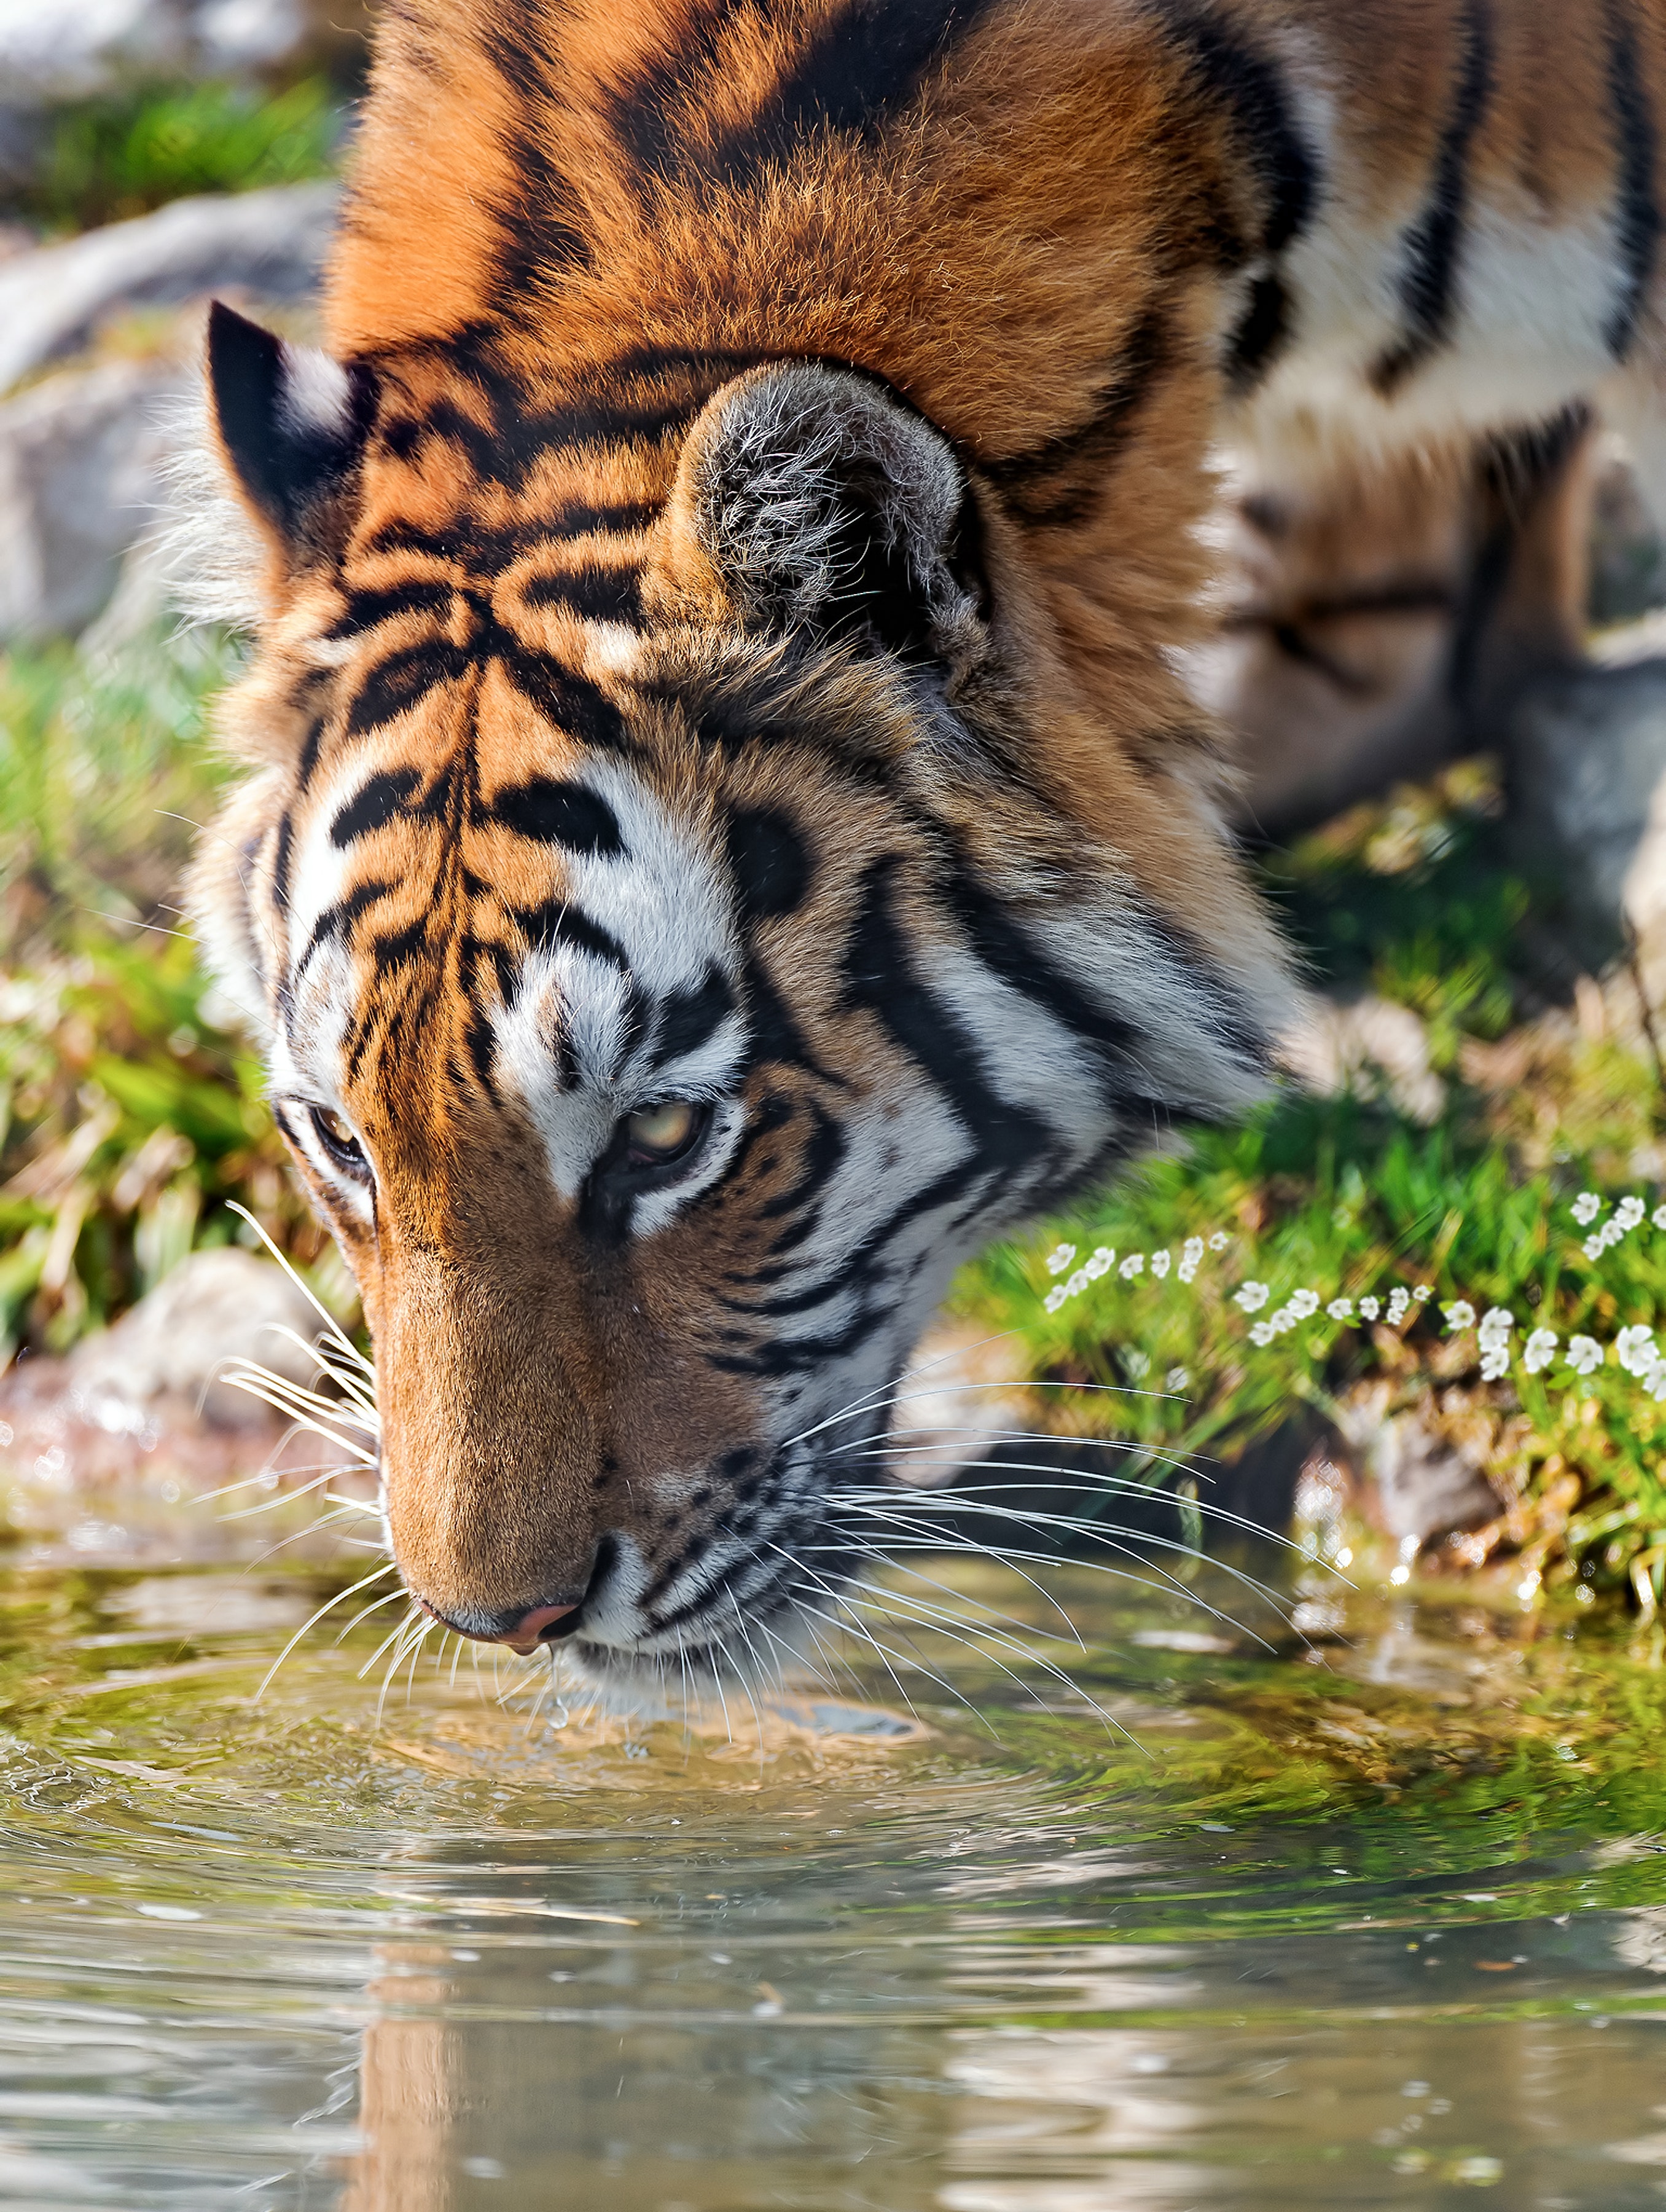 Close-up photo of a tiger drinking water